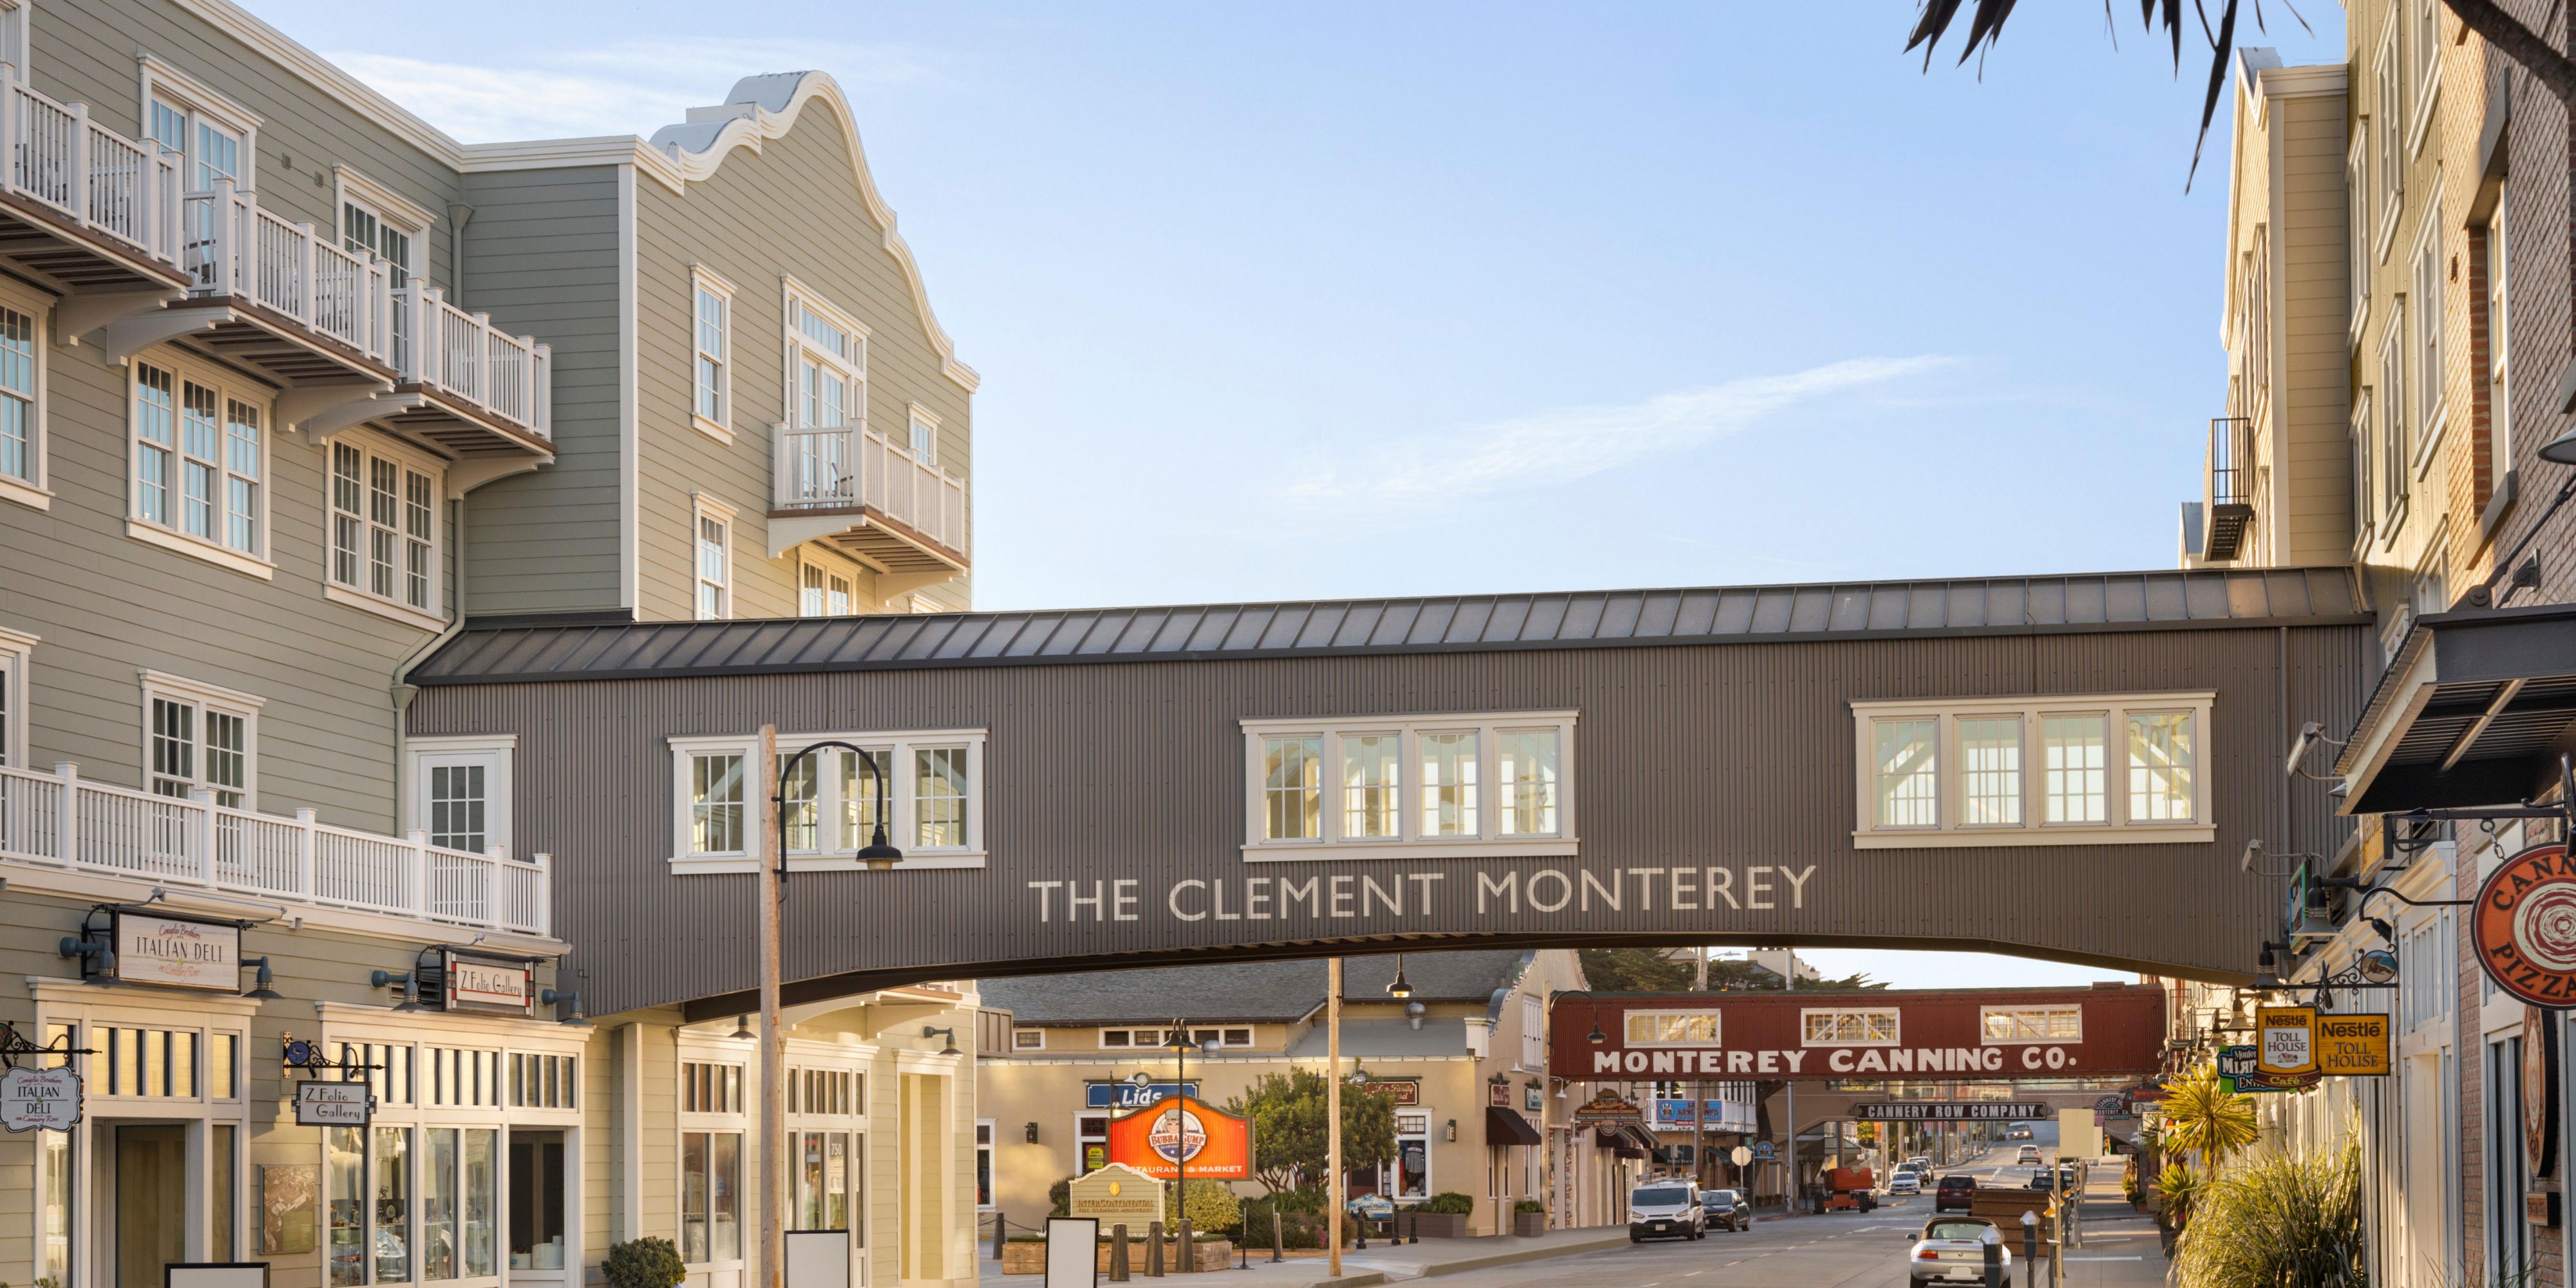 Made famous by John Steinbeck's celebrated book of the same name, the historic Cannery Row is the perfect place to take a pleasant stroll, shop, dine, and taste local wines.